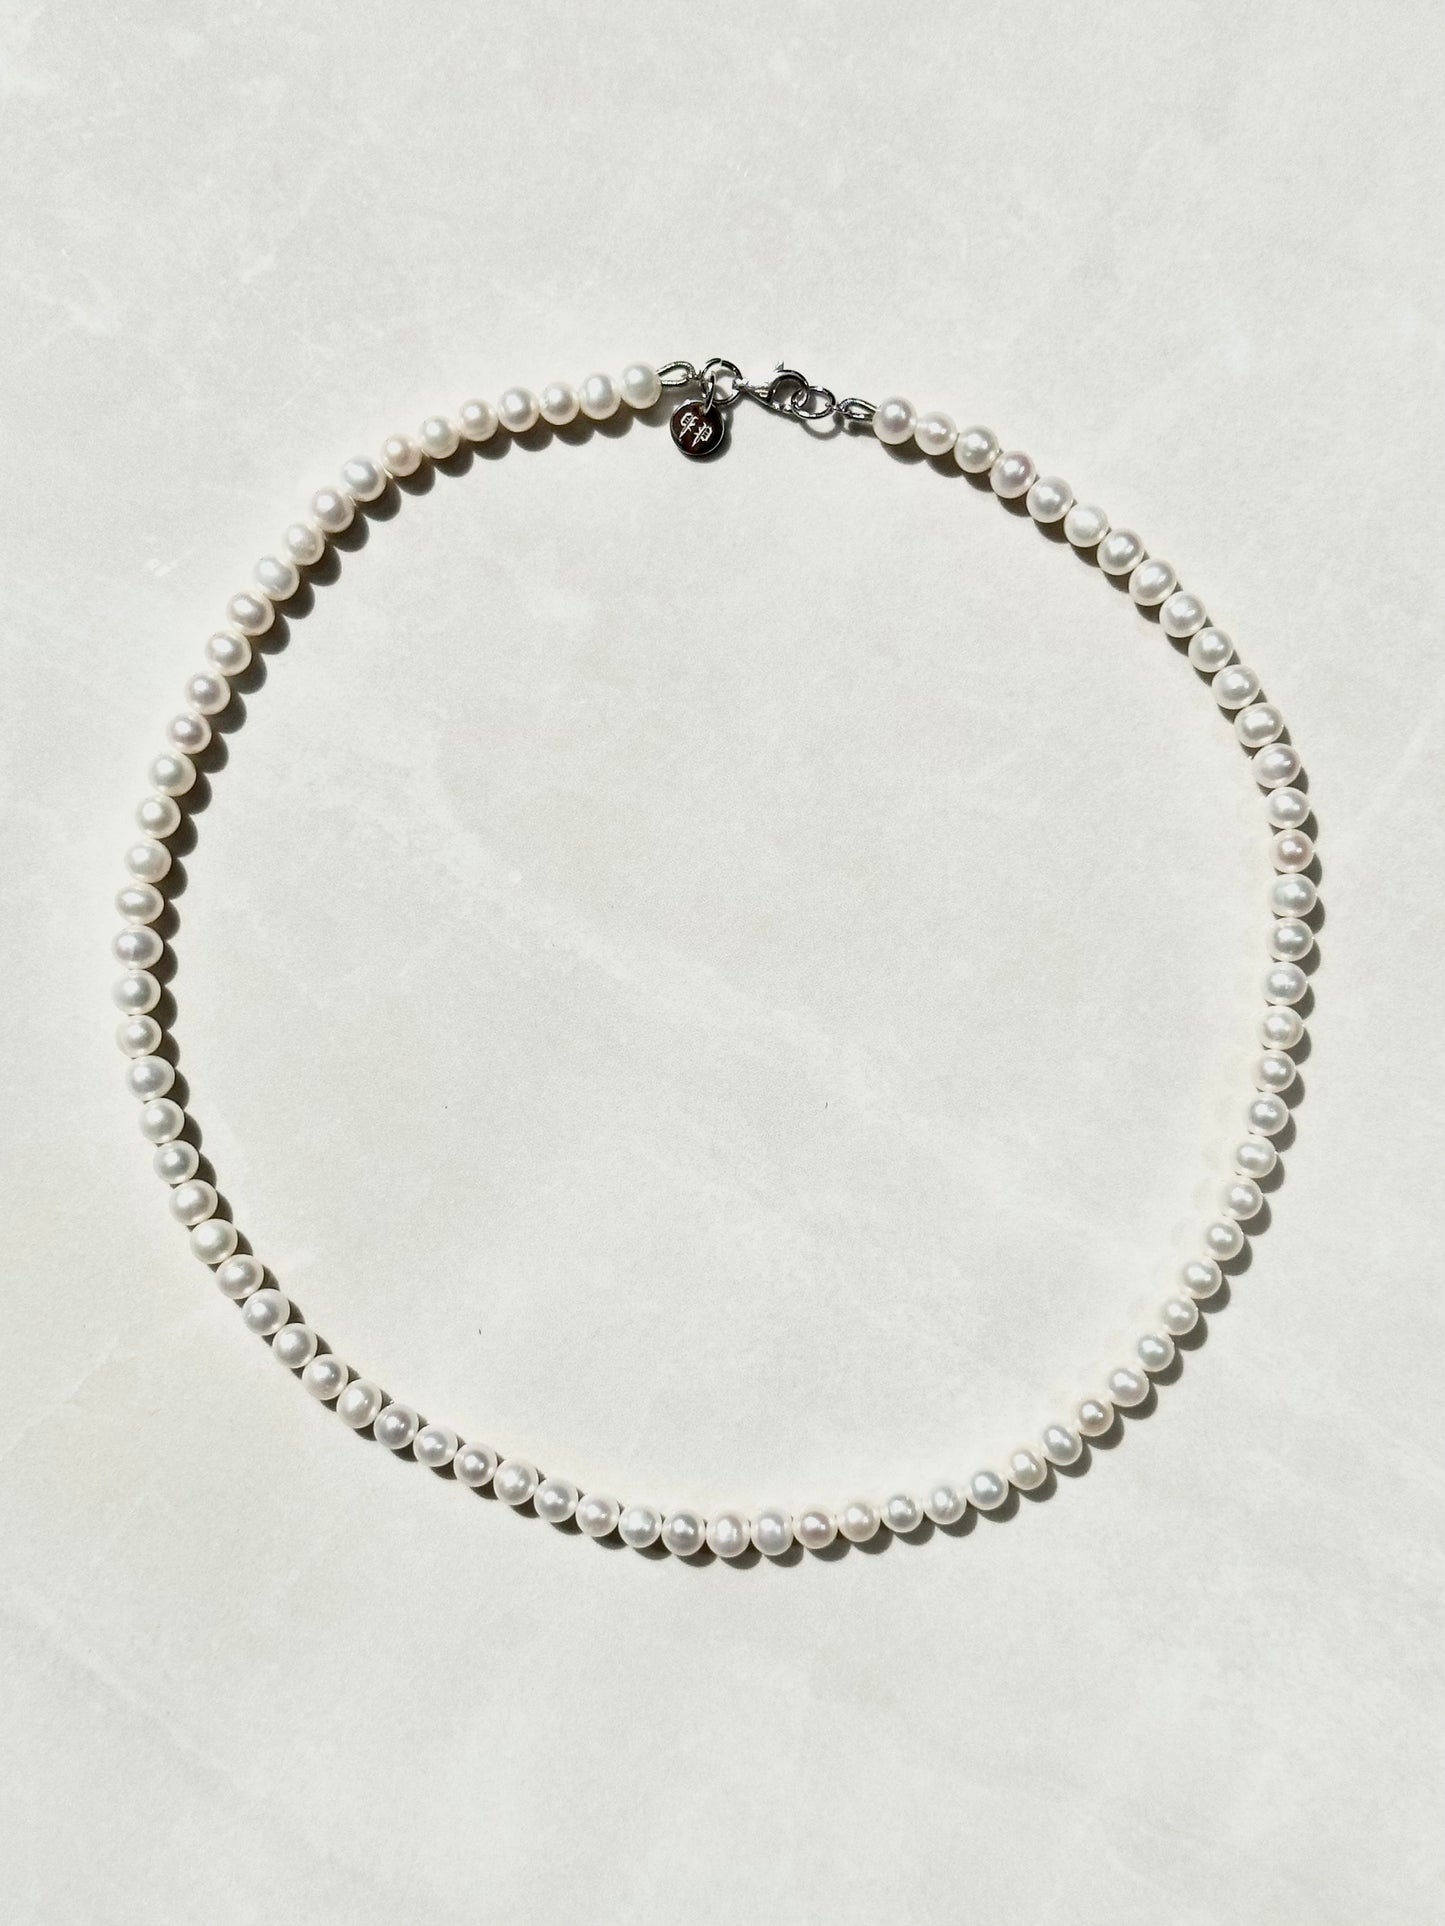 6mm Natural Fresh Water Pearl Chain - White Gold